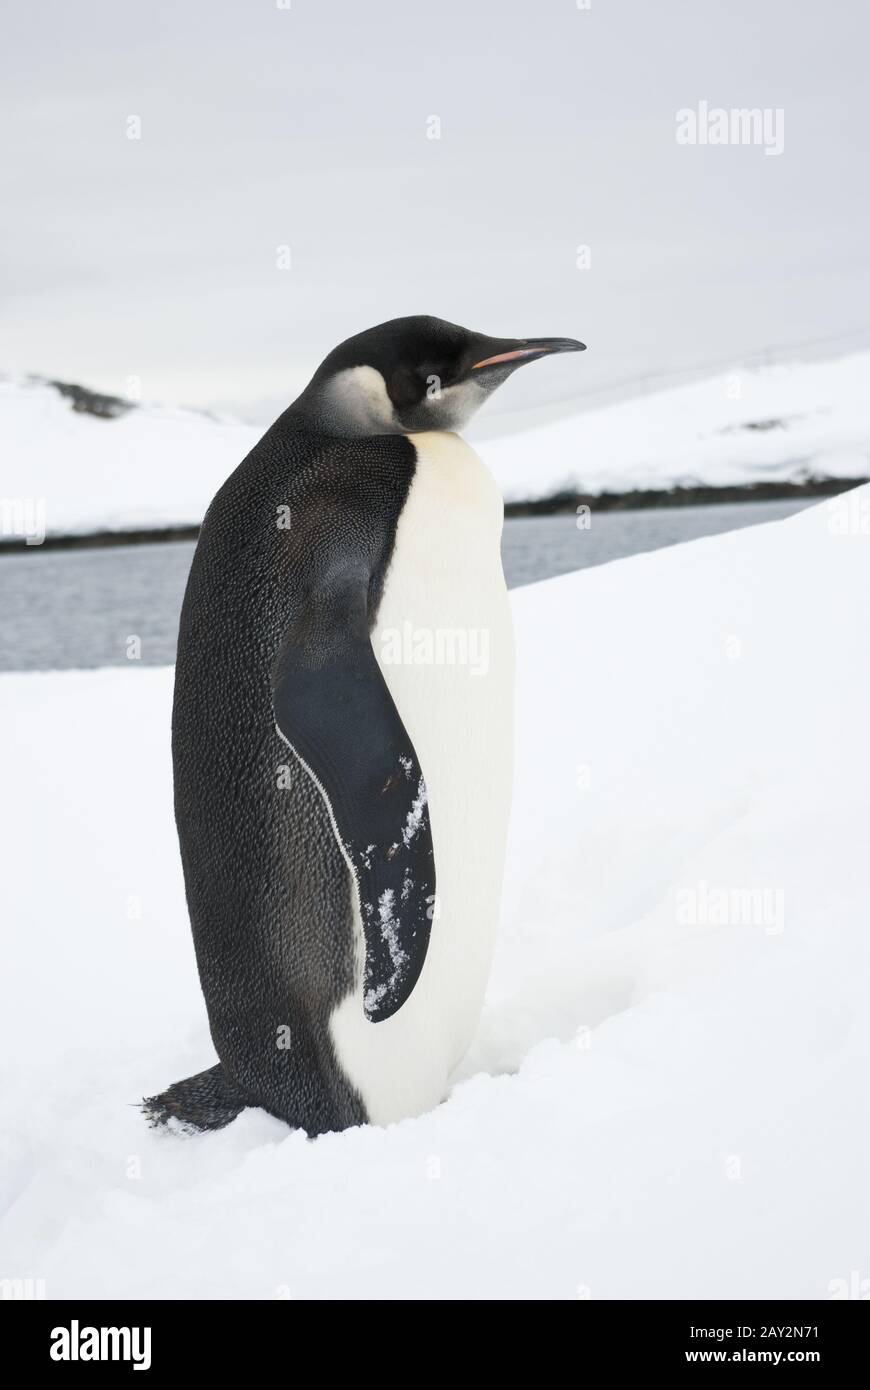 The young emperor penguin standing in the snow on а winter day. Stock Photo